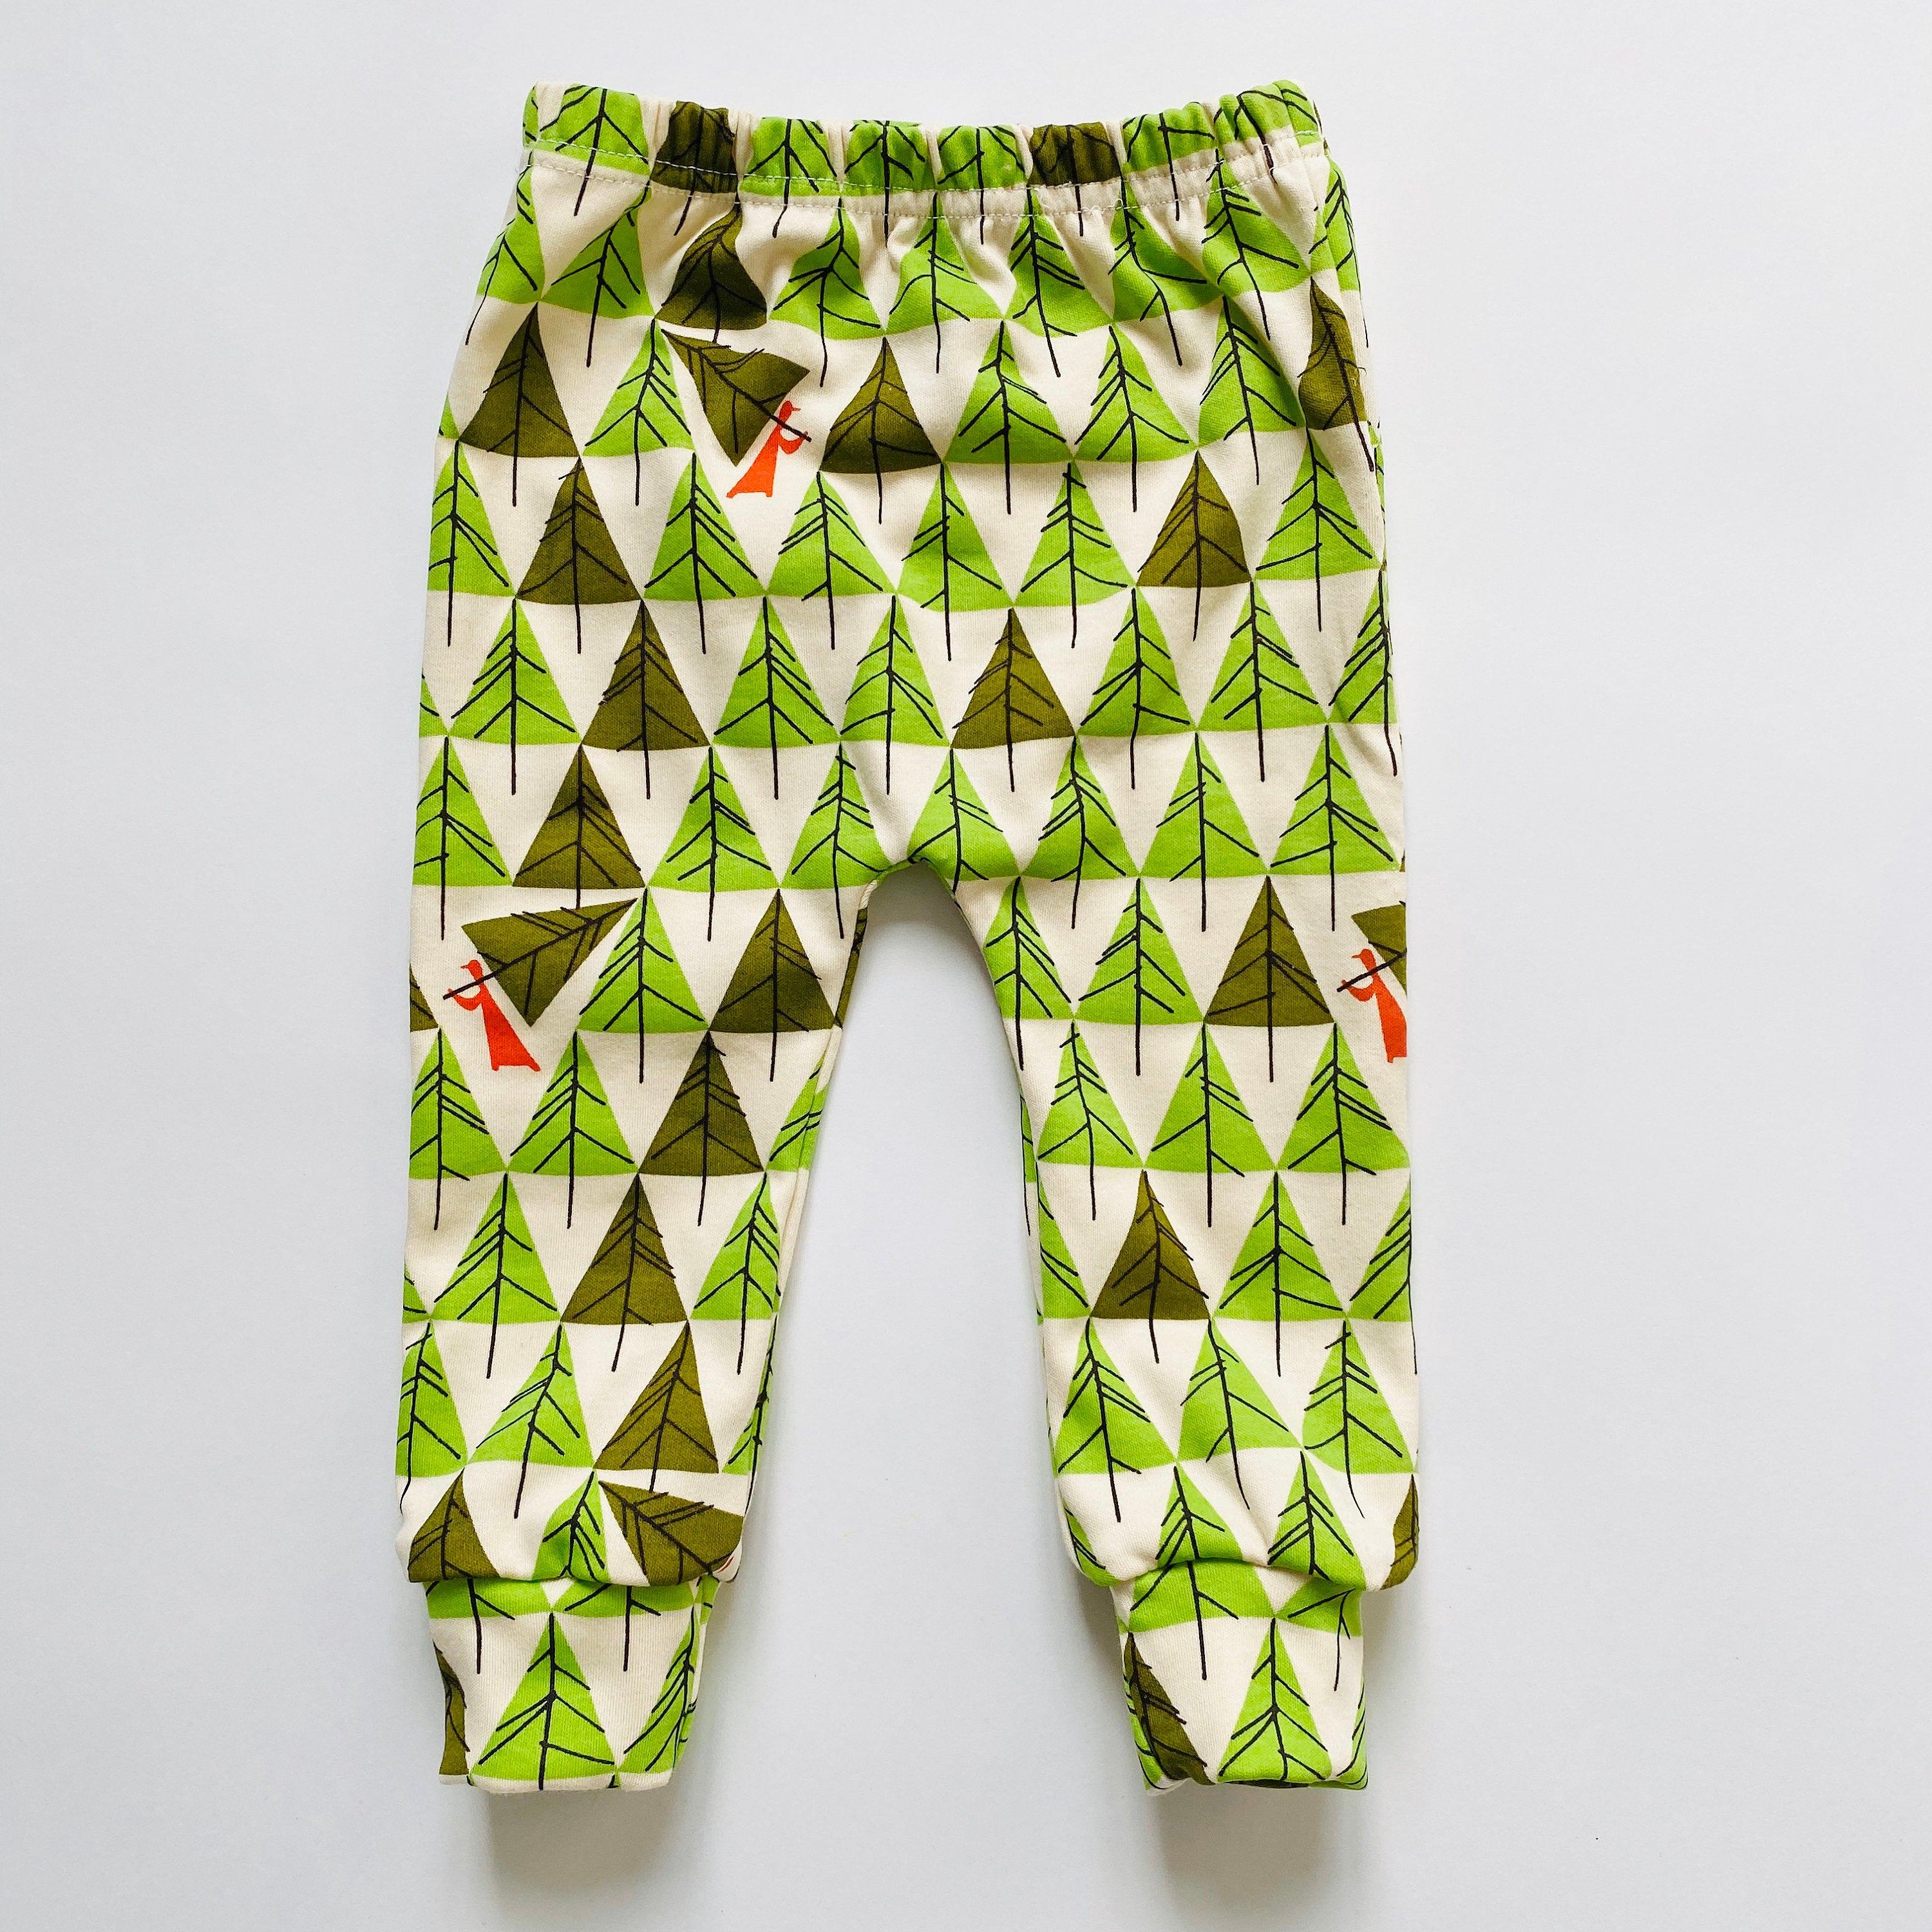 Eddie & Bee limited edition Christmas organic cotton leggings in  "Pick the perfect tree" print.